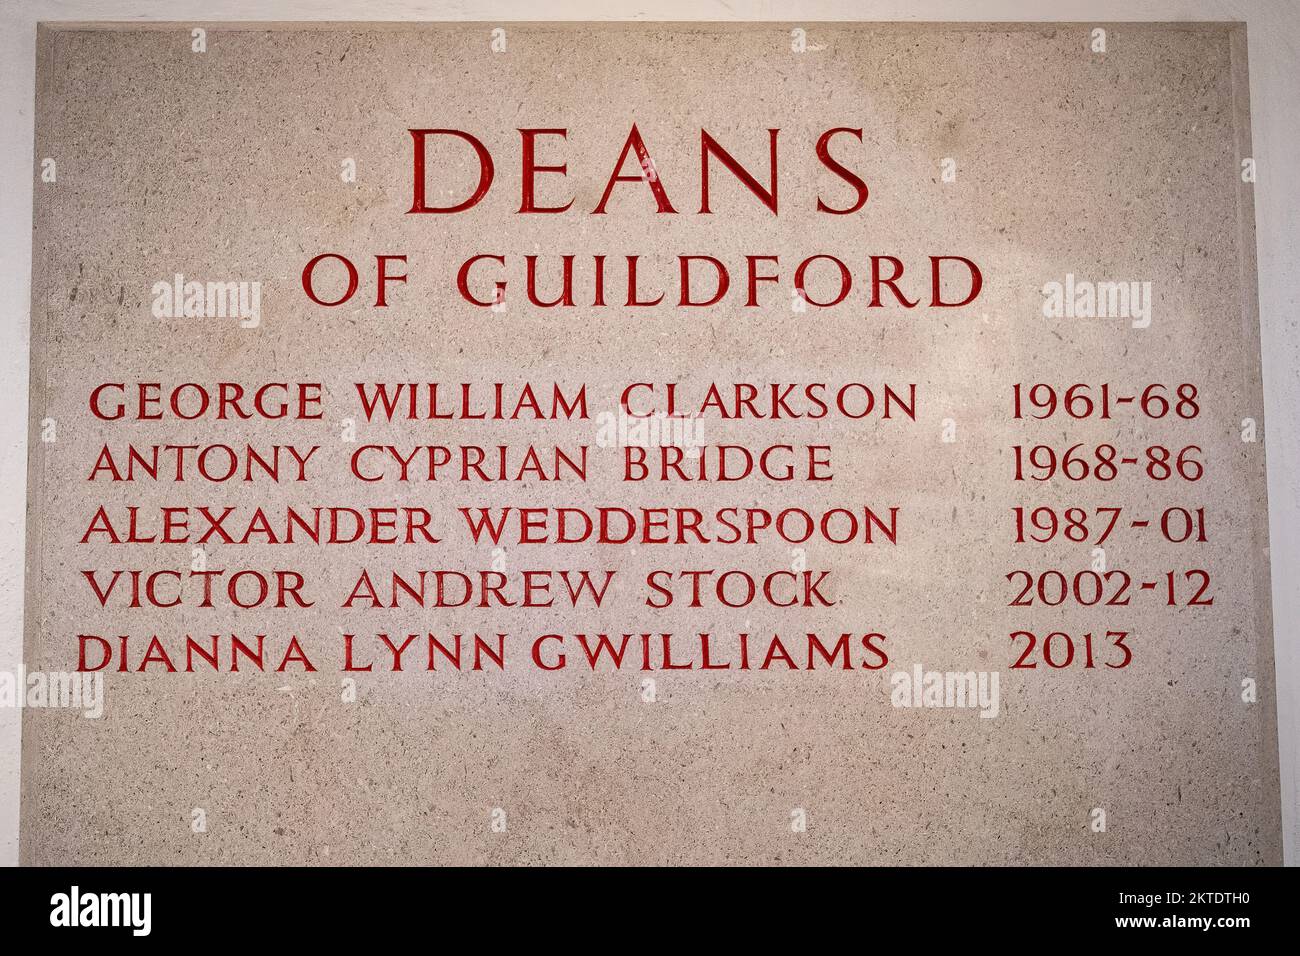 Deans of Guildford, list on stone plaque inside Guildford Cathedral, Surrey, England, UK Stock Photo